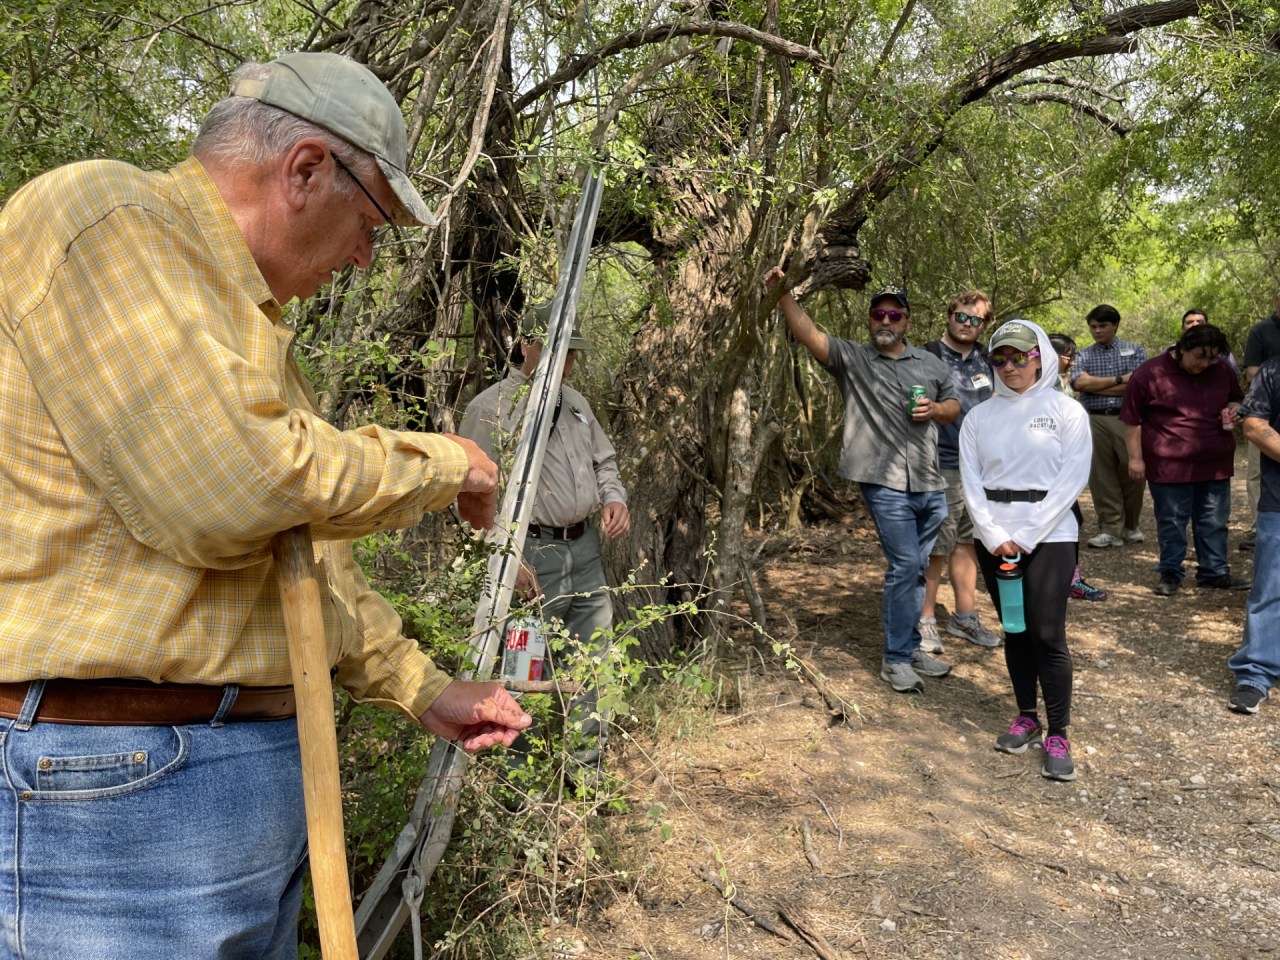 Water conservation, maintaining rich vegetation urged amid South Texas drought [Video]